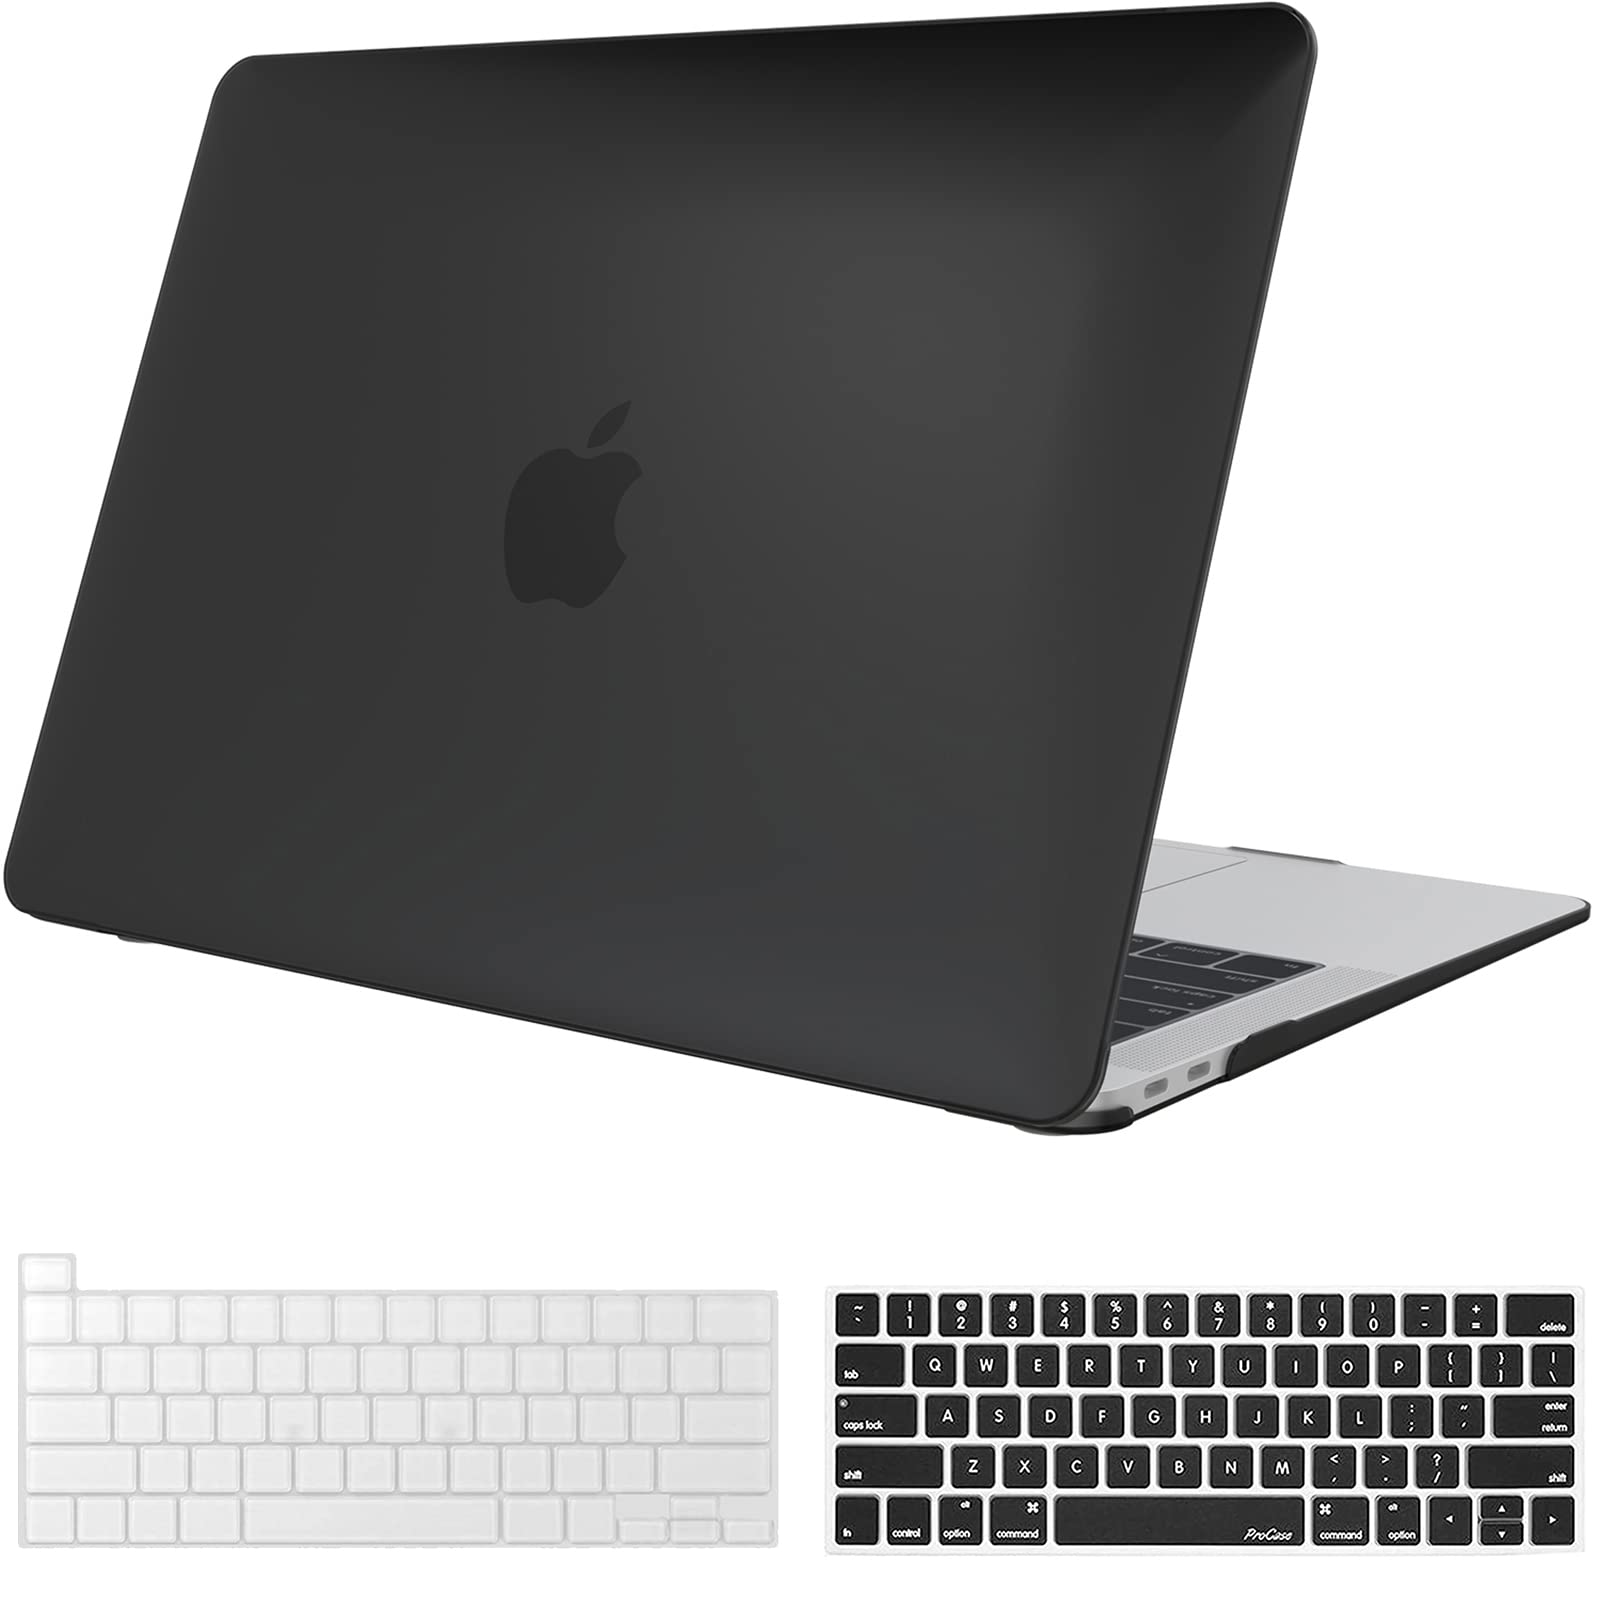 ProCase's hard shell case and keyboard cover for MacBook Pro 13-inch